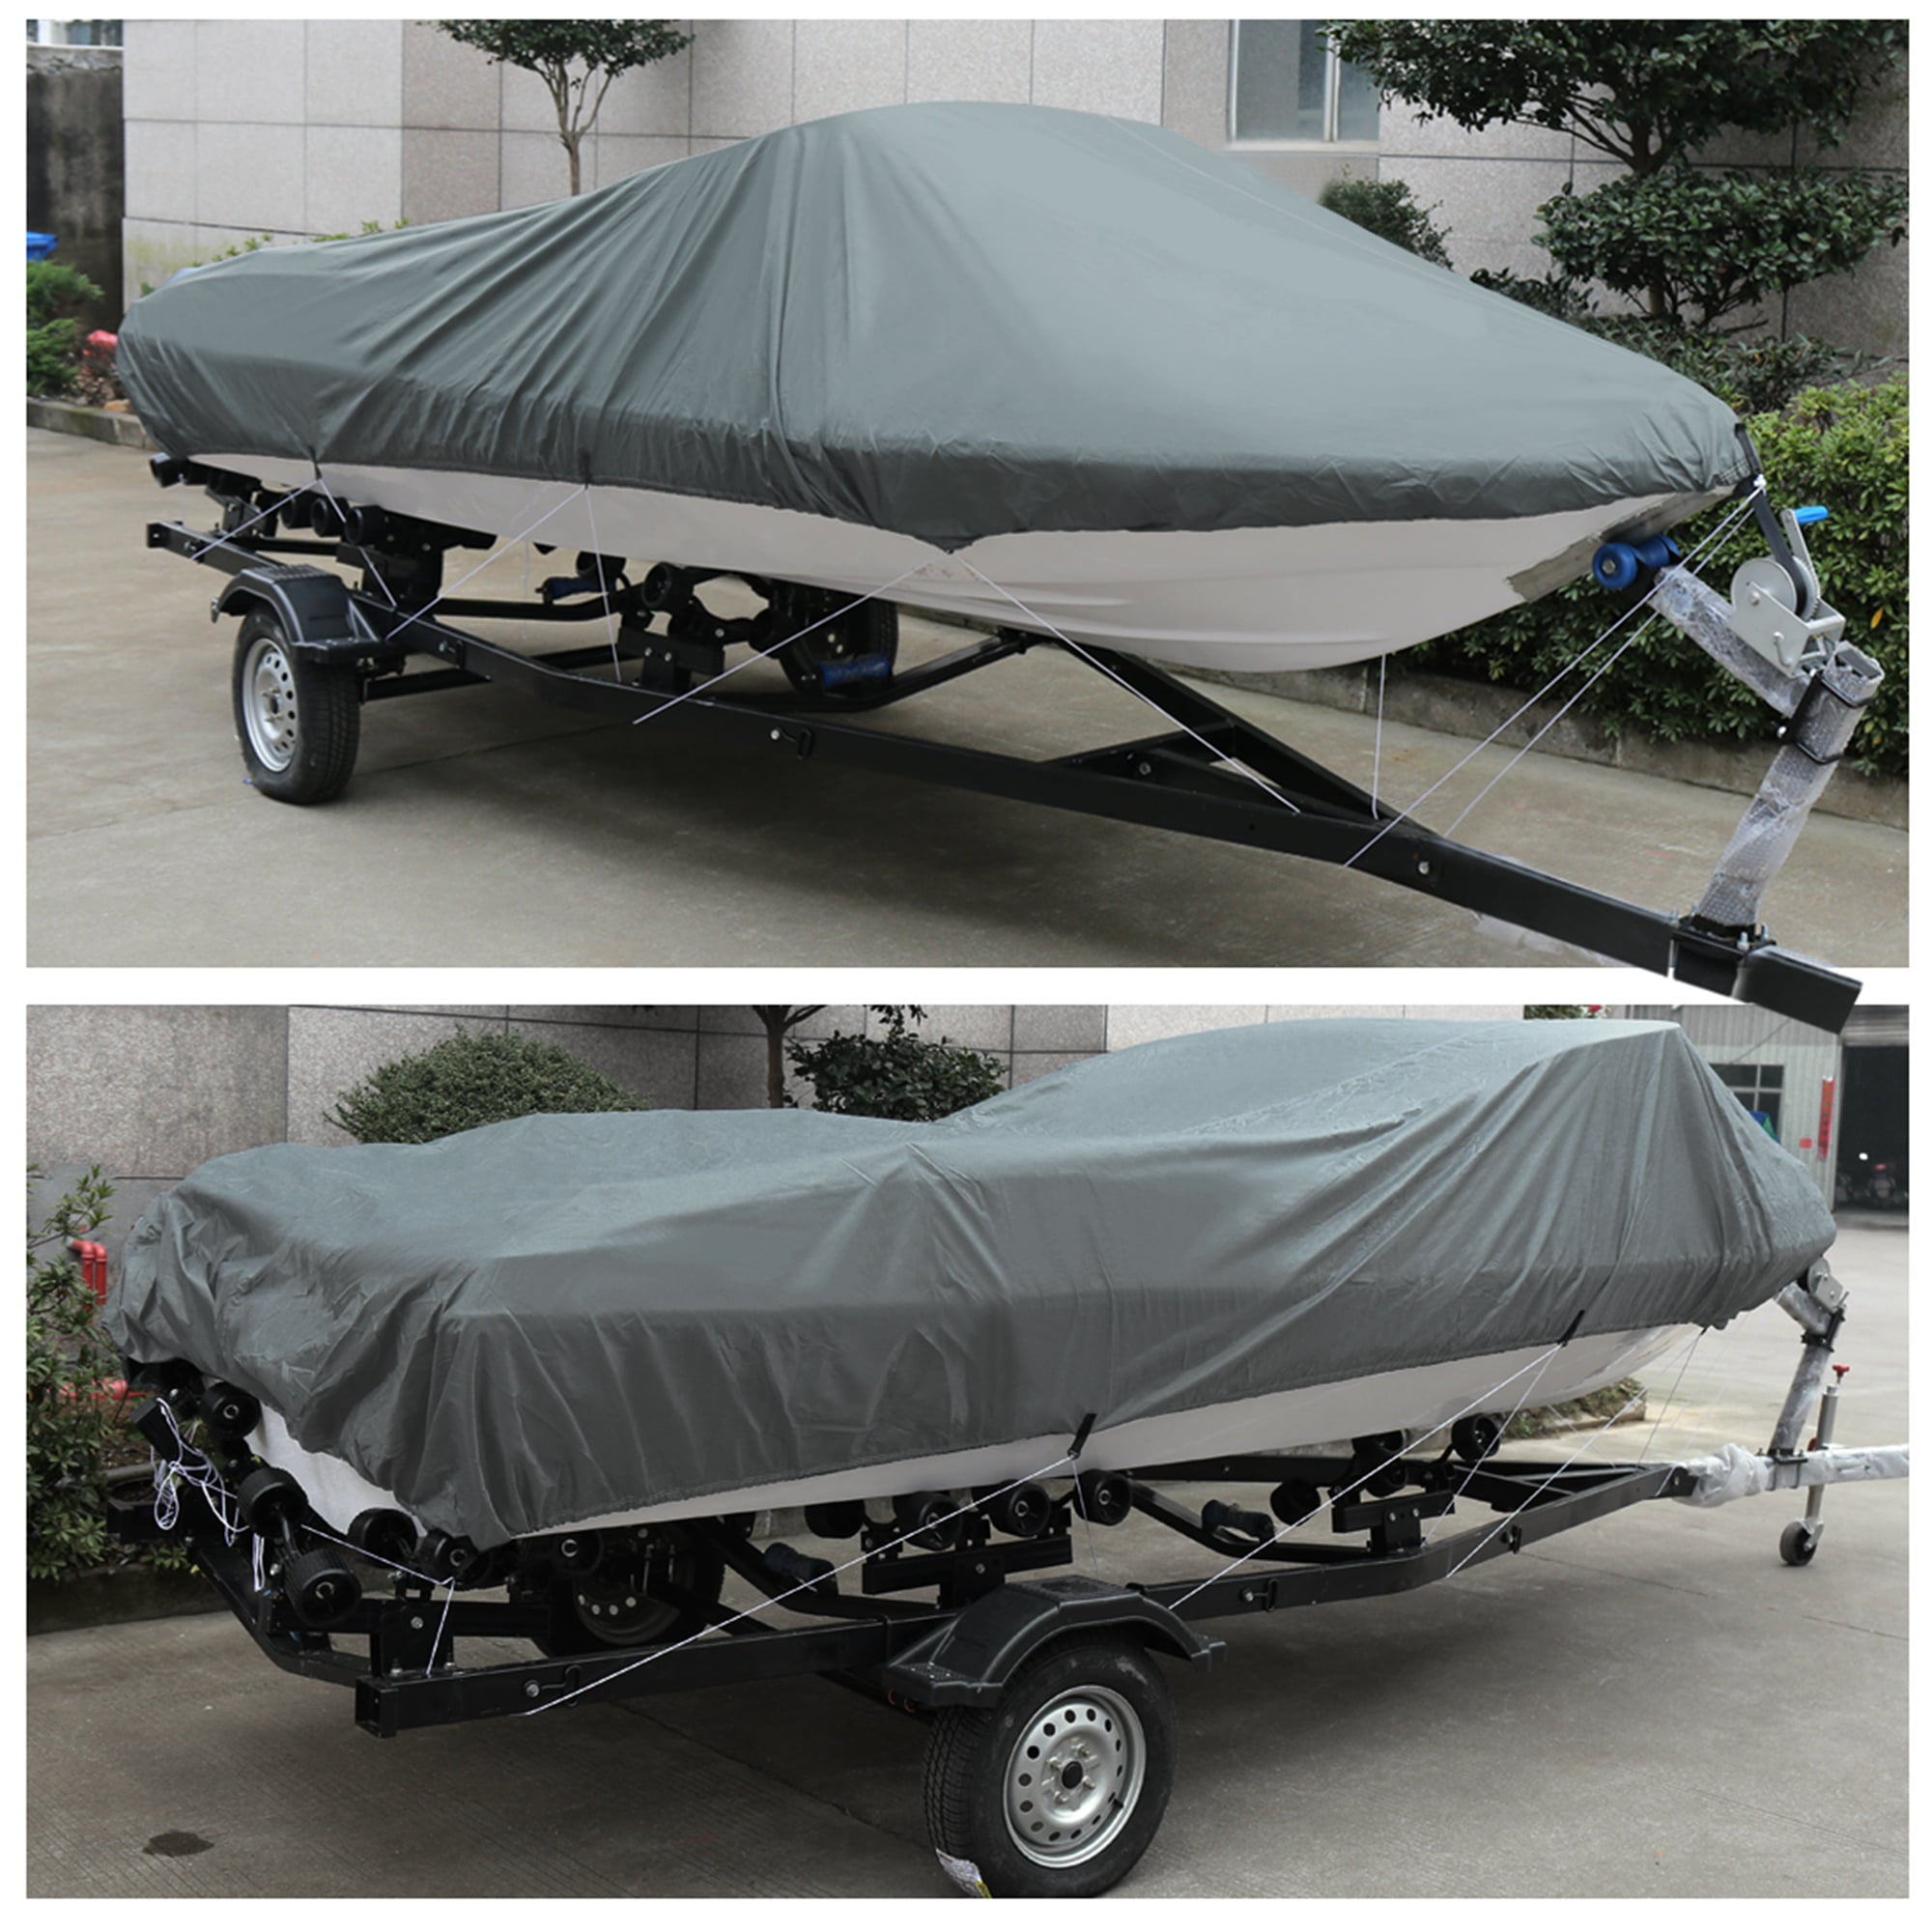 V-Hull 210-Denier Waterproof Boat Cover for 20'-22' Trailerable Fishing Ski Boats Runabout Covers Gray